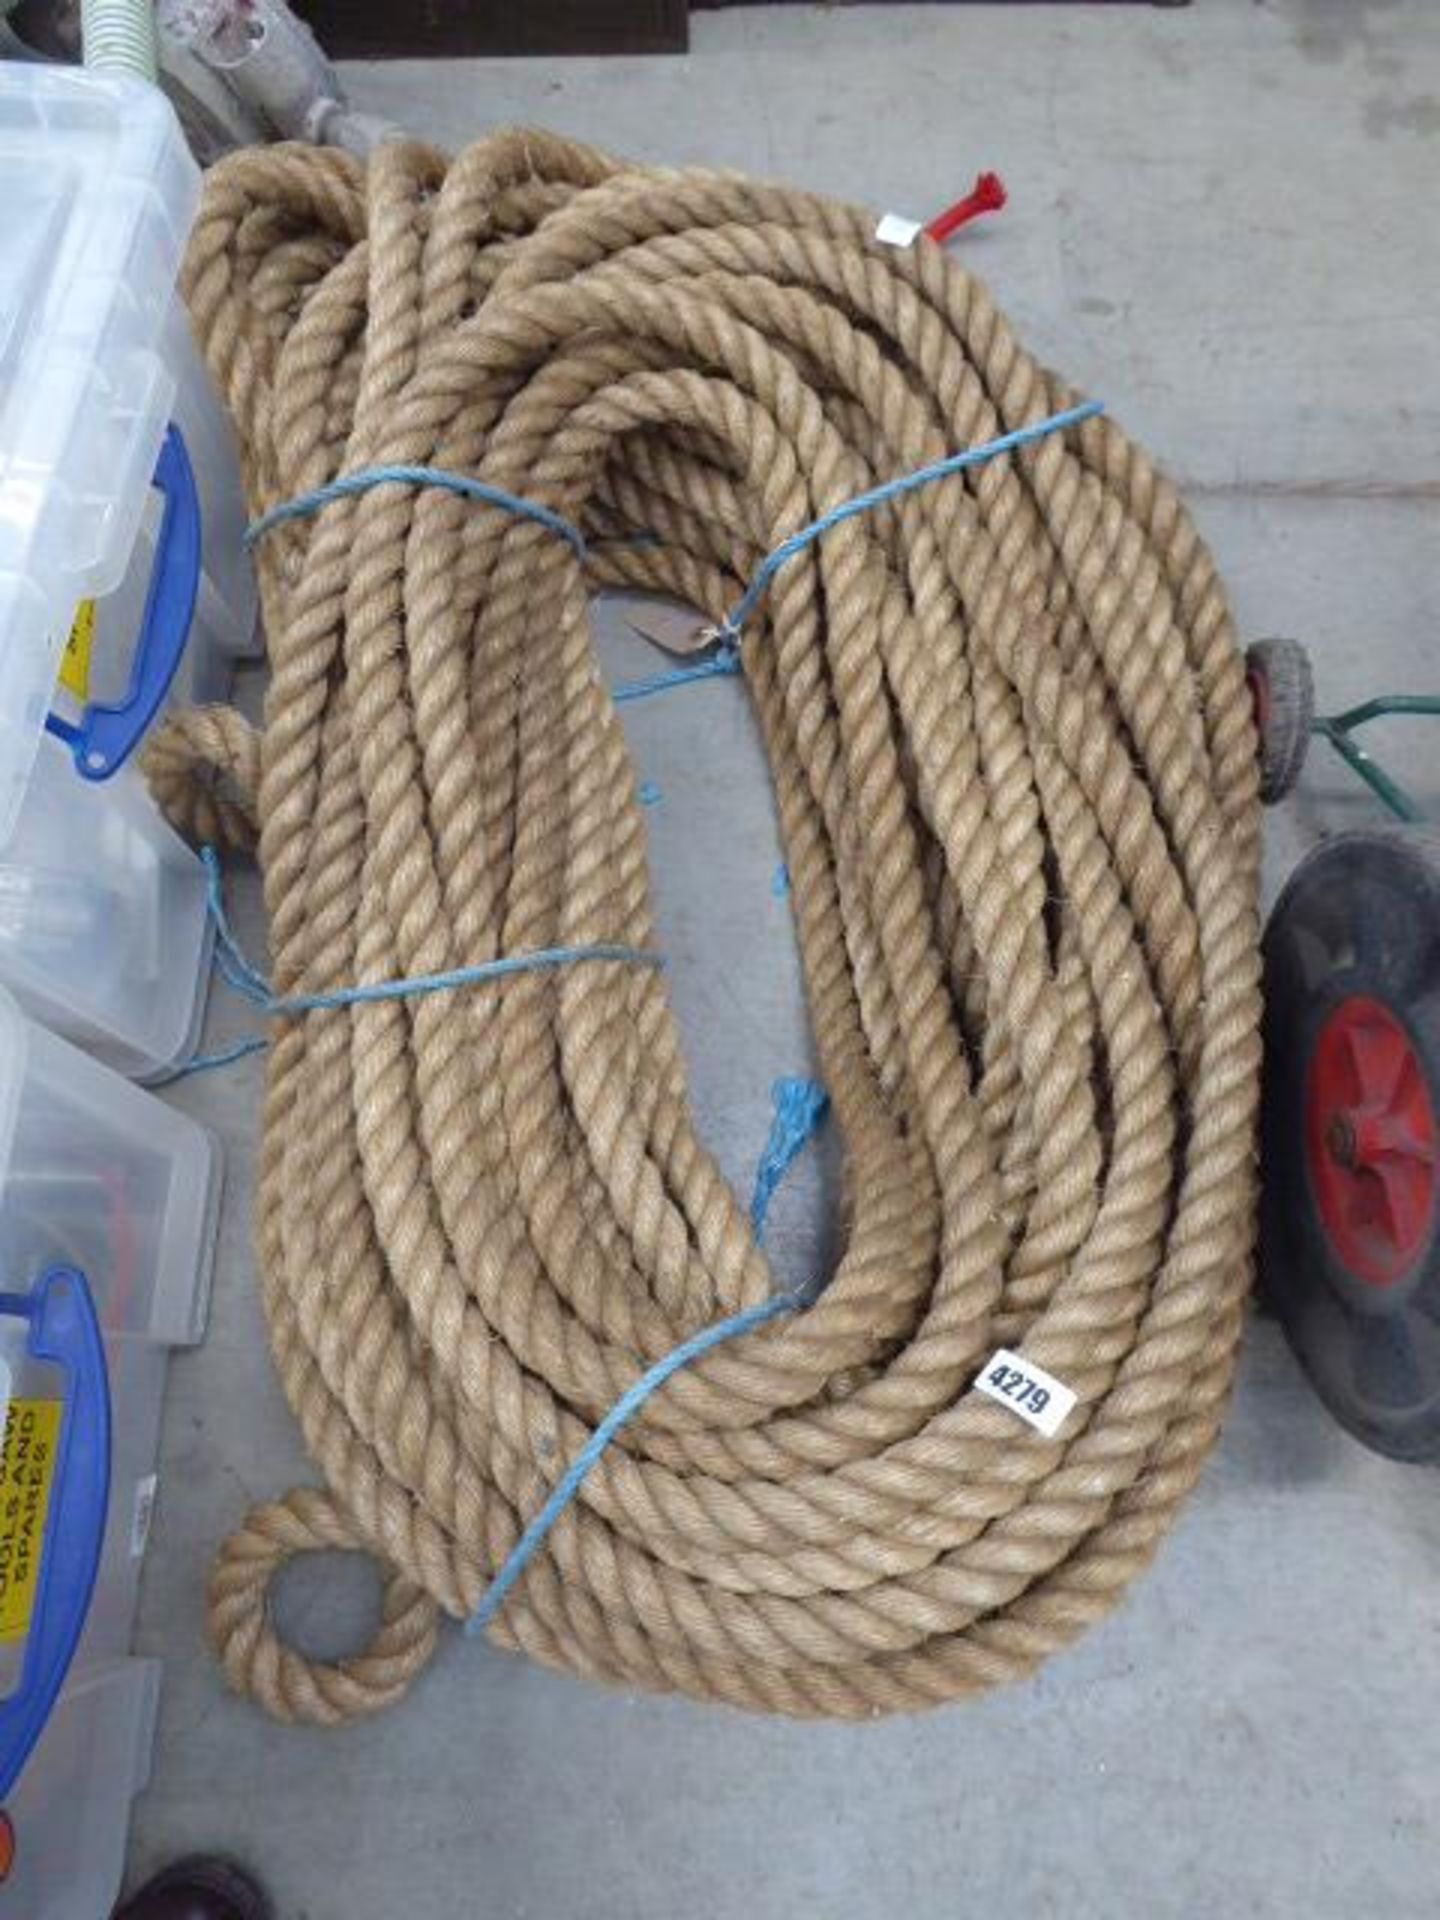 A large coil of rope